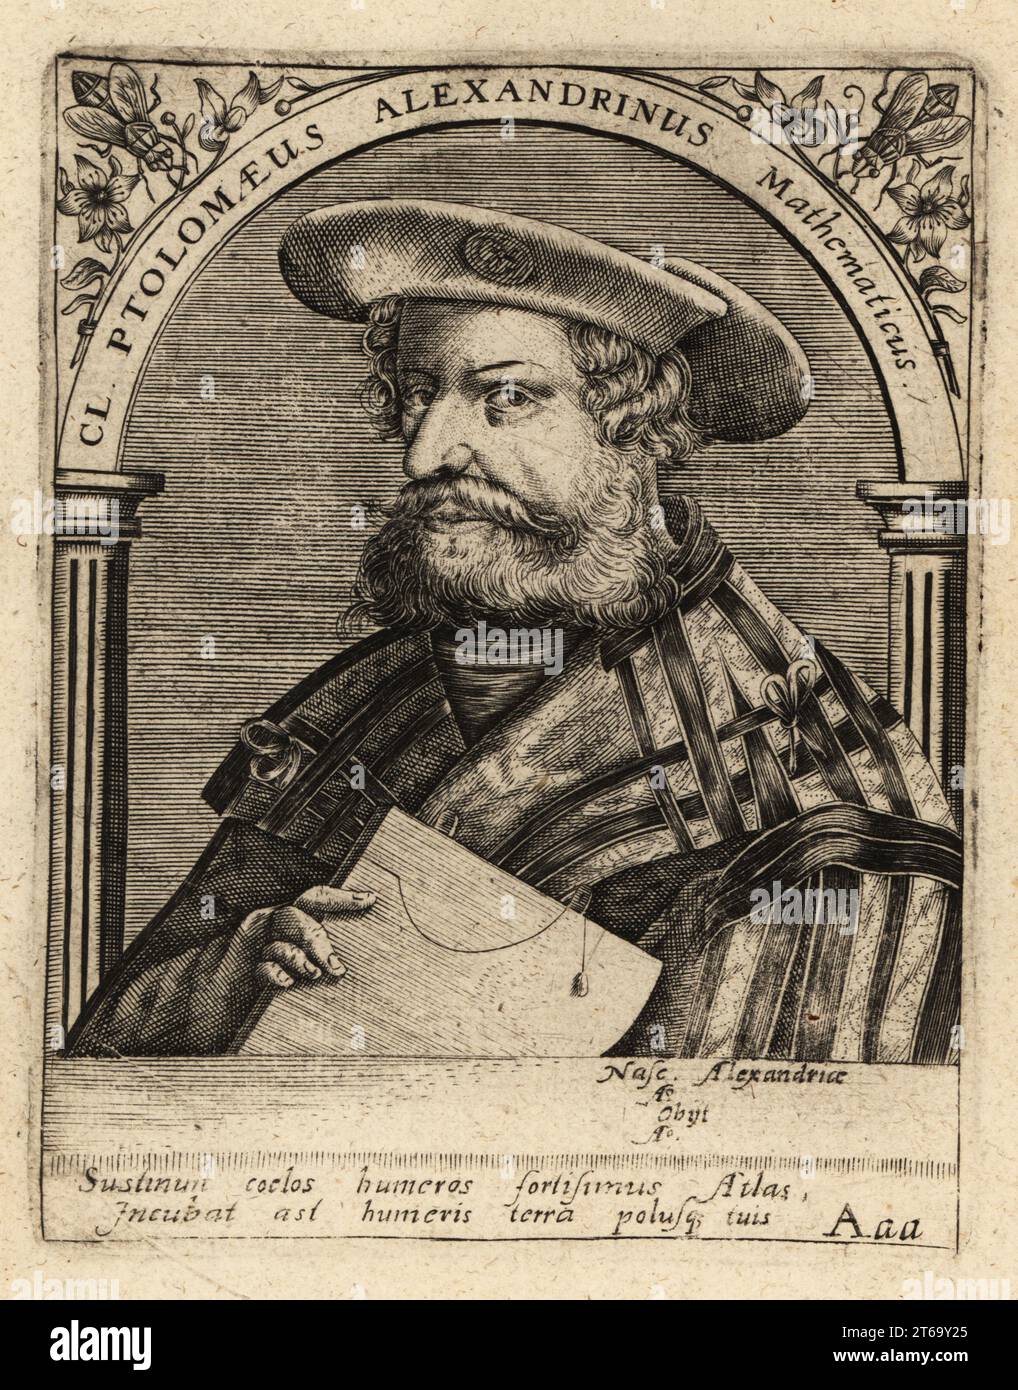 Nicolaus Germanus, German cartographer who published an edition of Jacopo d'Angelo's Latin translation of Ptolemy's Geography, c1420-1490. CL Ptolomaeus Alexandrinus Mathematicus. Copperplate engraving by Johann Theodore de Bry from Jean-Jacques Boissards Bibliotheca Chalcographica, Johann Ammonius, Frankfurt, 1650. Stock Photo